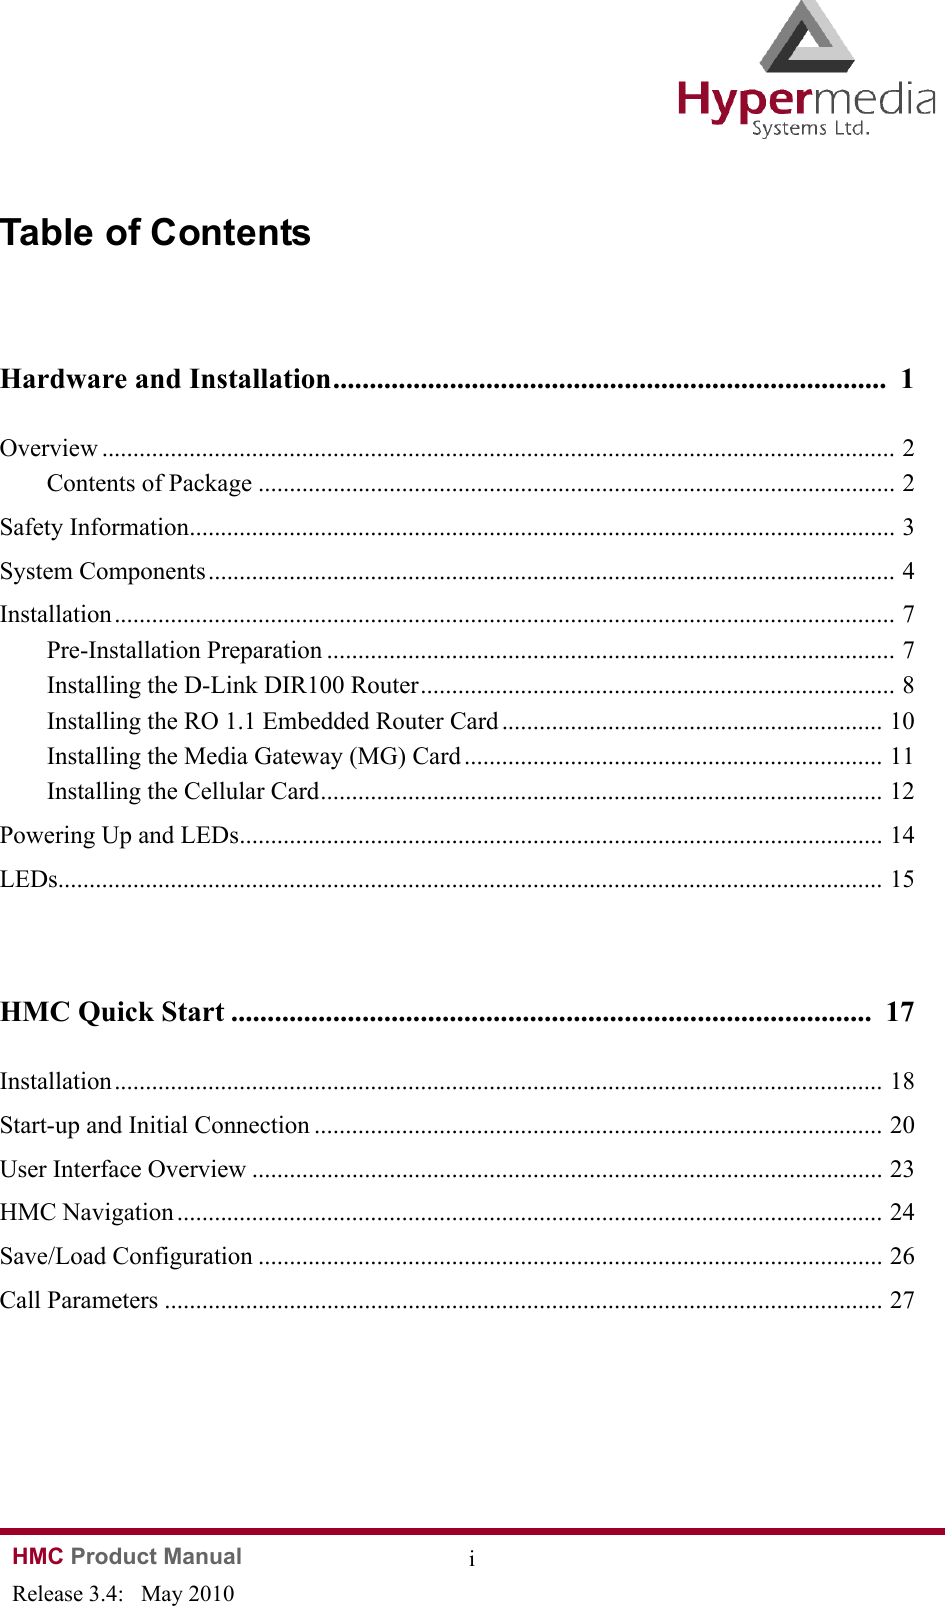 HMC Product Manual  iRelease 3.4:   May 2010Table of ContentsHardware and Installation............................................................................  1Overview ............................................................................................................................... 2Contents of Package ...................................................................................................... 2Safety Information................................................................................................................. 3System Components.............................................................................................................. 4Installation............................................................................................................................. 7Pre-Installation Preparation ........................................................................................... 7Installing the D-Link DIR100 Router............................................................................ 8Installing the RO 1.1 Embedded Router Card ............................................................. 10Installing the Media Gateway (MG) Card ................................................................... 11Installing the Cellular Card.......................................................................................... 12Powering Up and LEDs....................................................................................................... 14LEDs.................................................................................................................................... 15HMC Quick Start ........................................................................................  17Installation........................................................................................................................... 18Start-up and Initial Connection ........................................................................................... 20User Interface Overview ..................................................................................................... 23HMC Navigation ................................................................................................................. 24Save/Load Configuration .................................................................................................... 26Call Parameters ................................................................................................................... 27